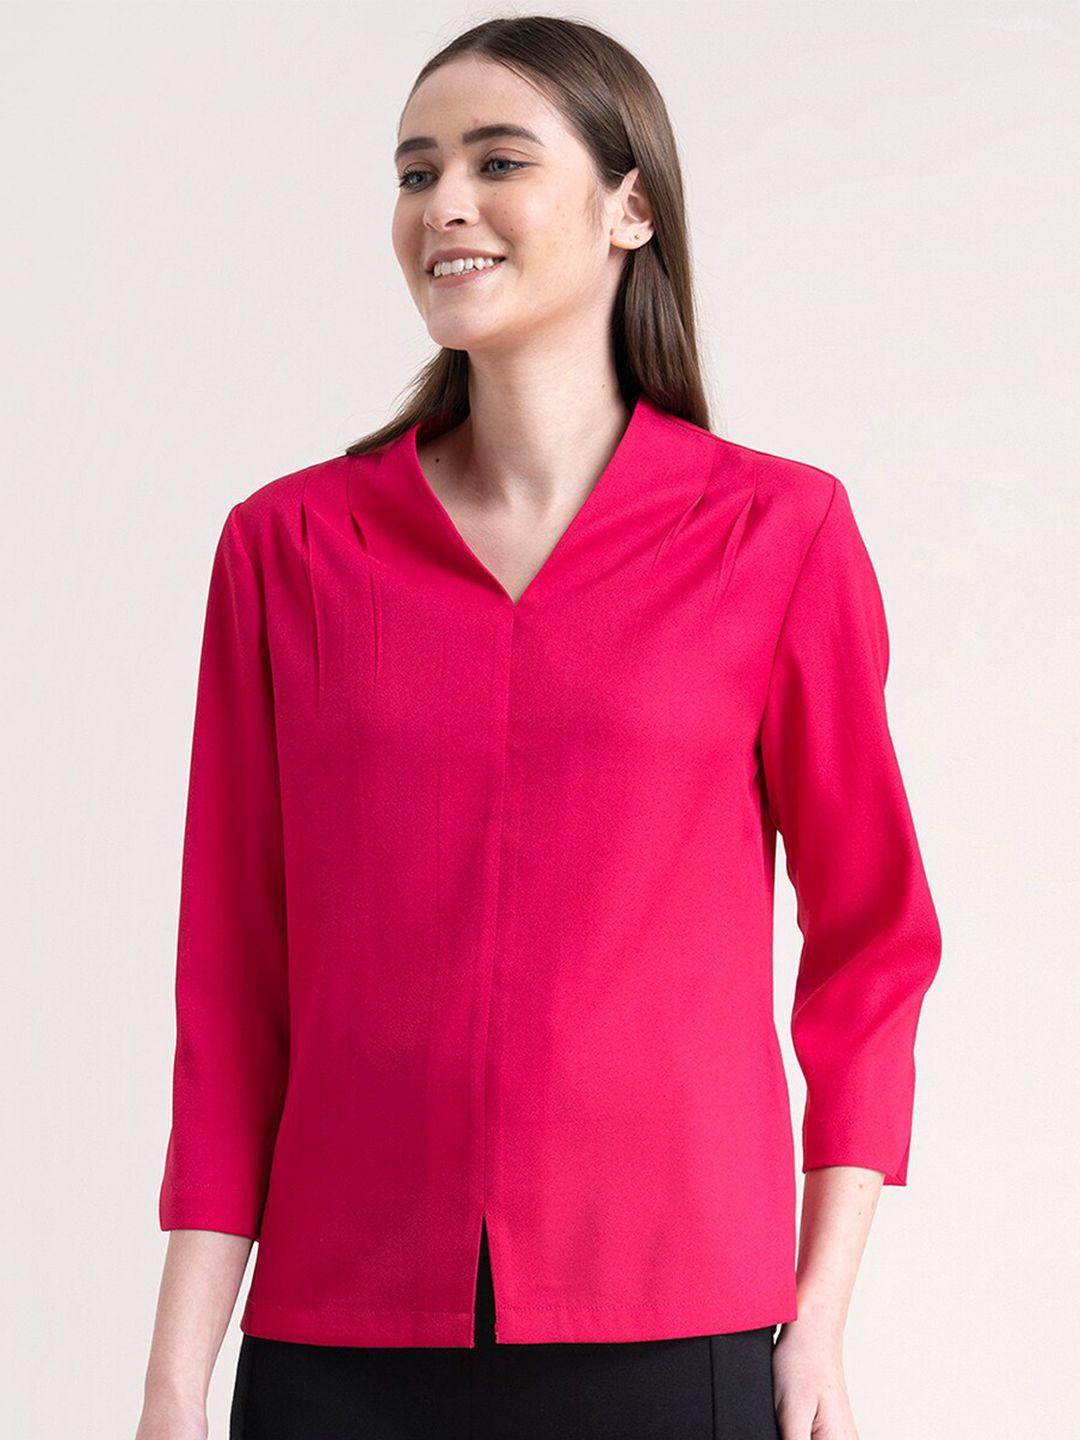 fablestreet fuchsia solid top